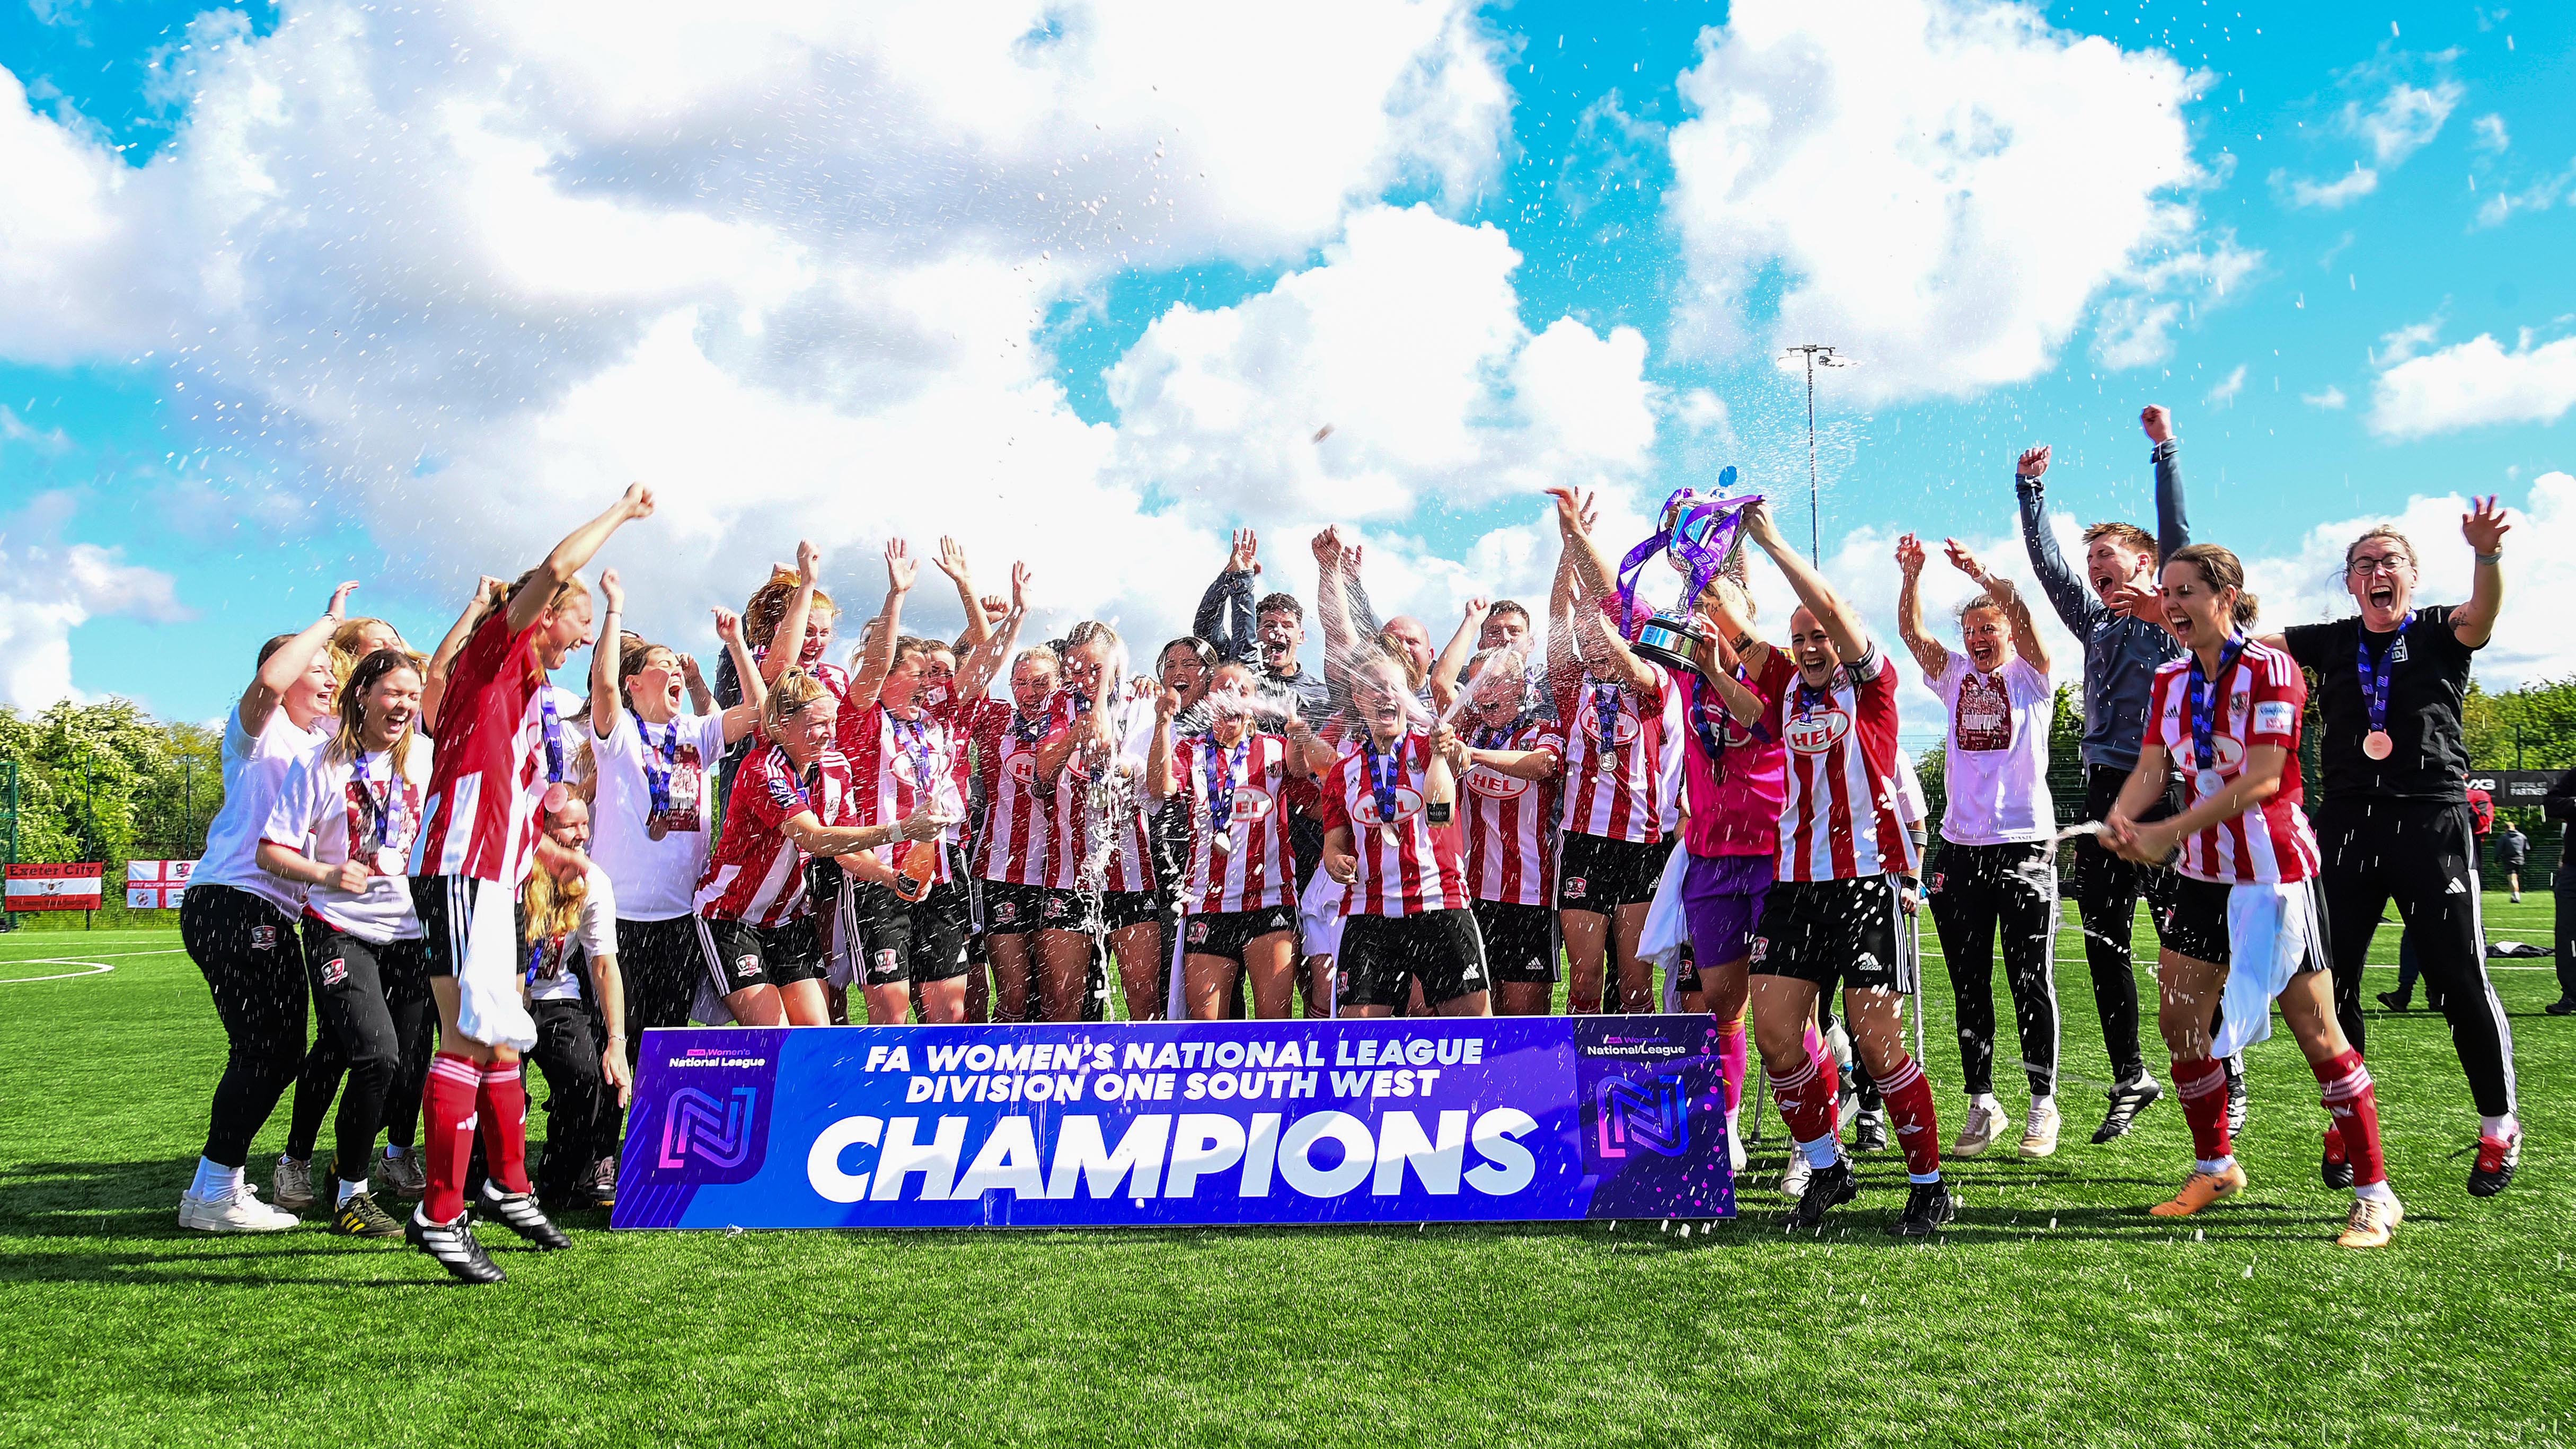 Exeter City Women are Champions